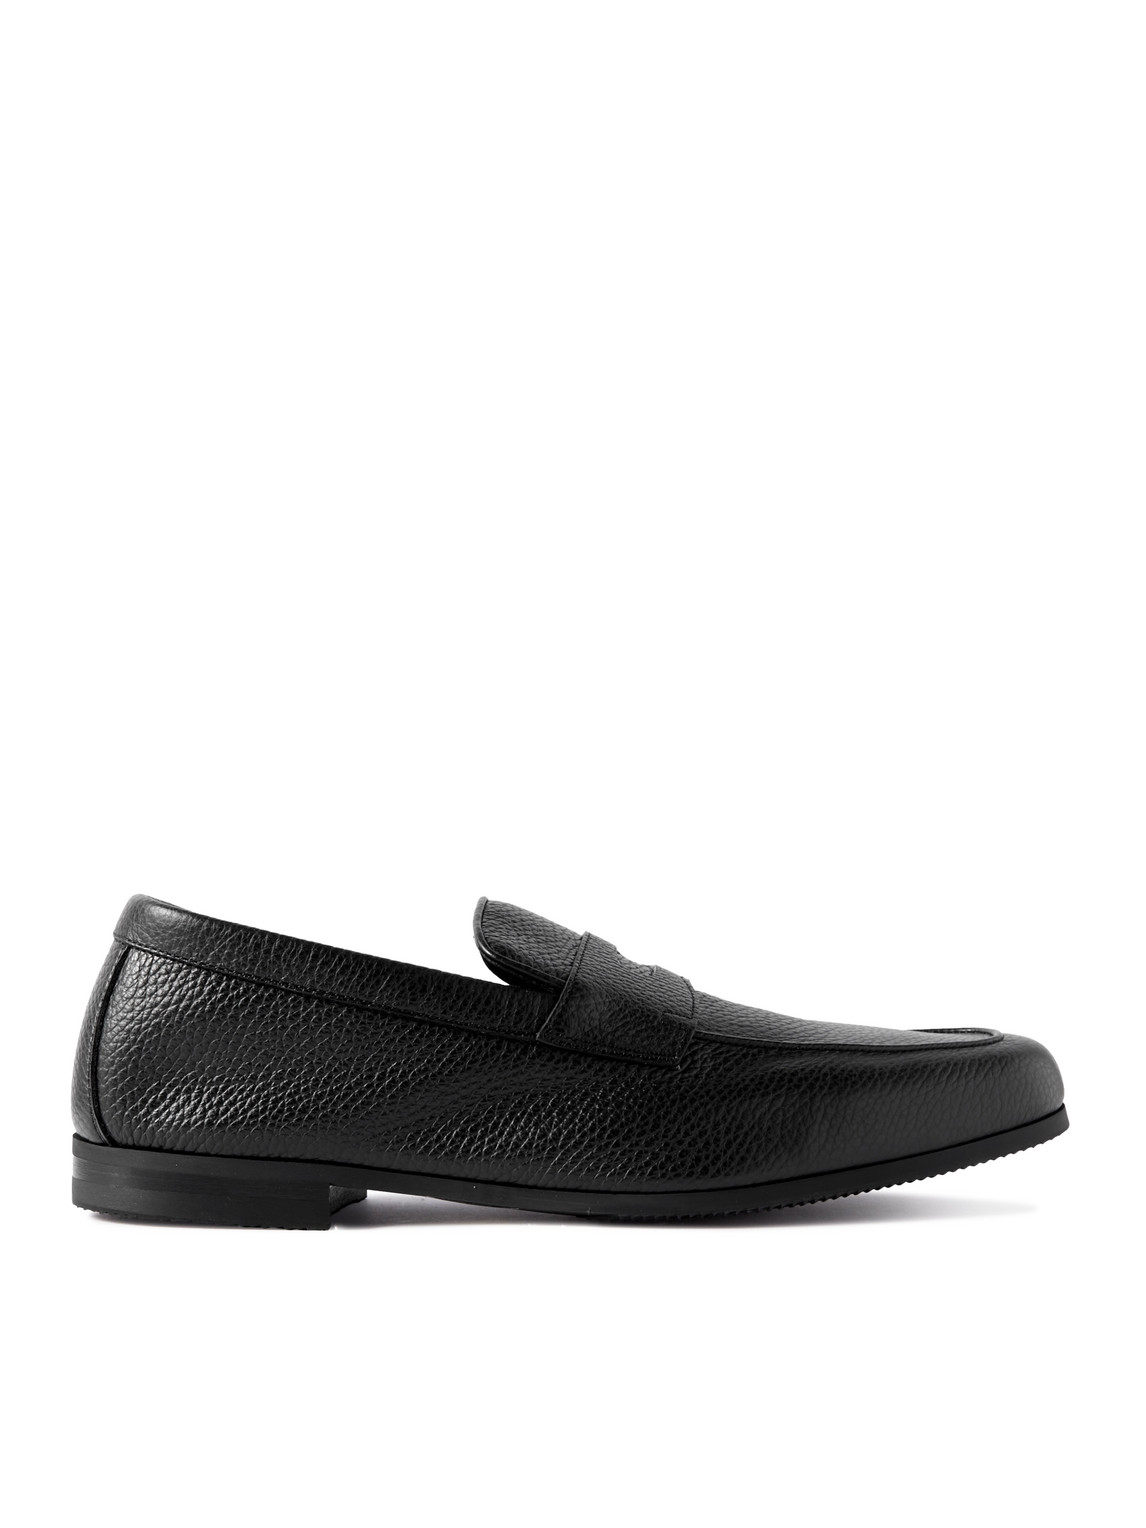 Thorne Full-Grain Leather Loafers